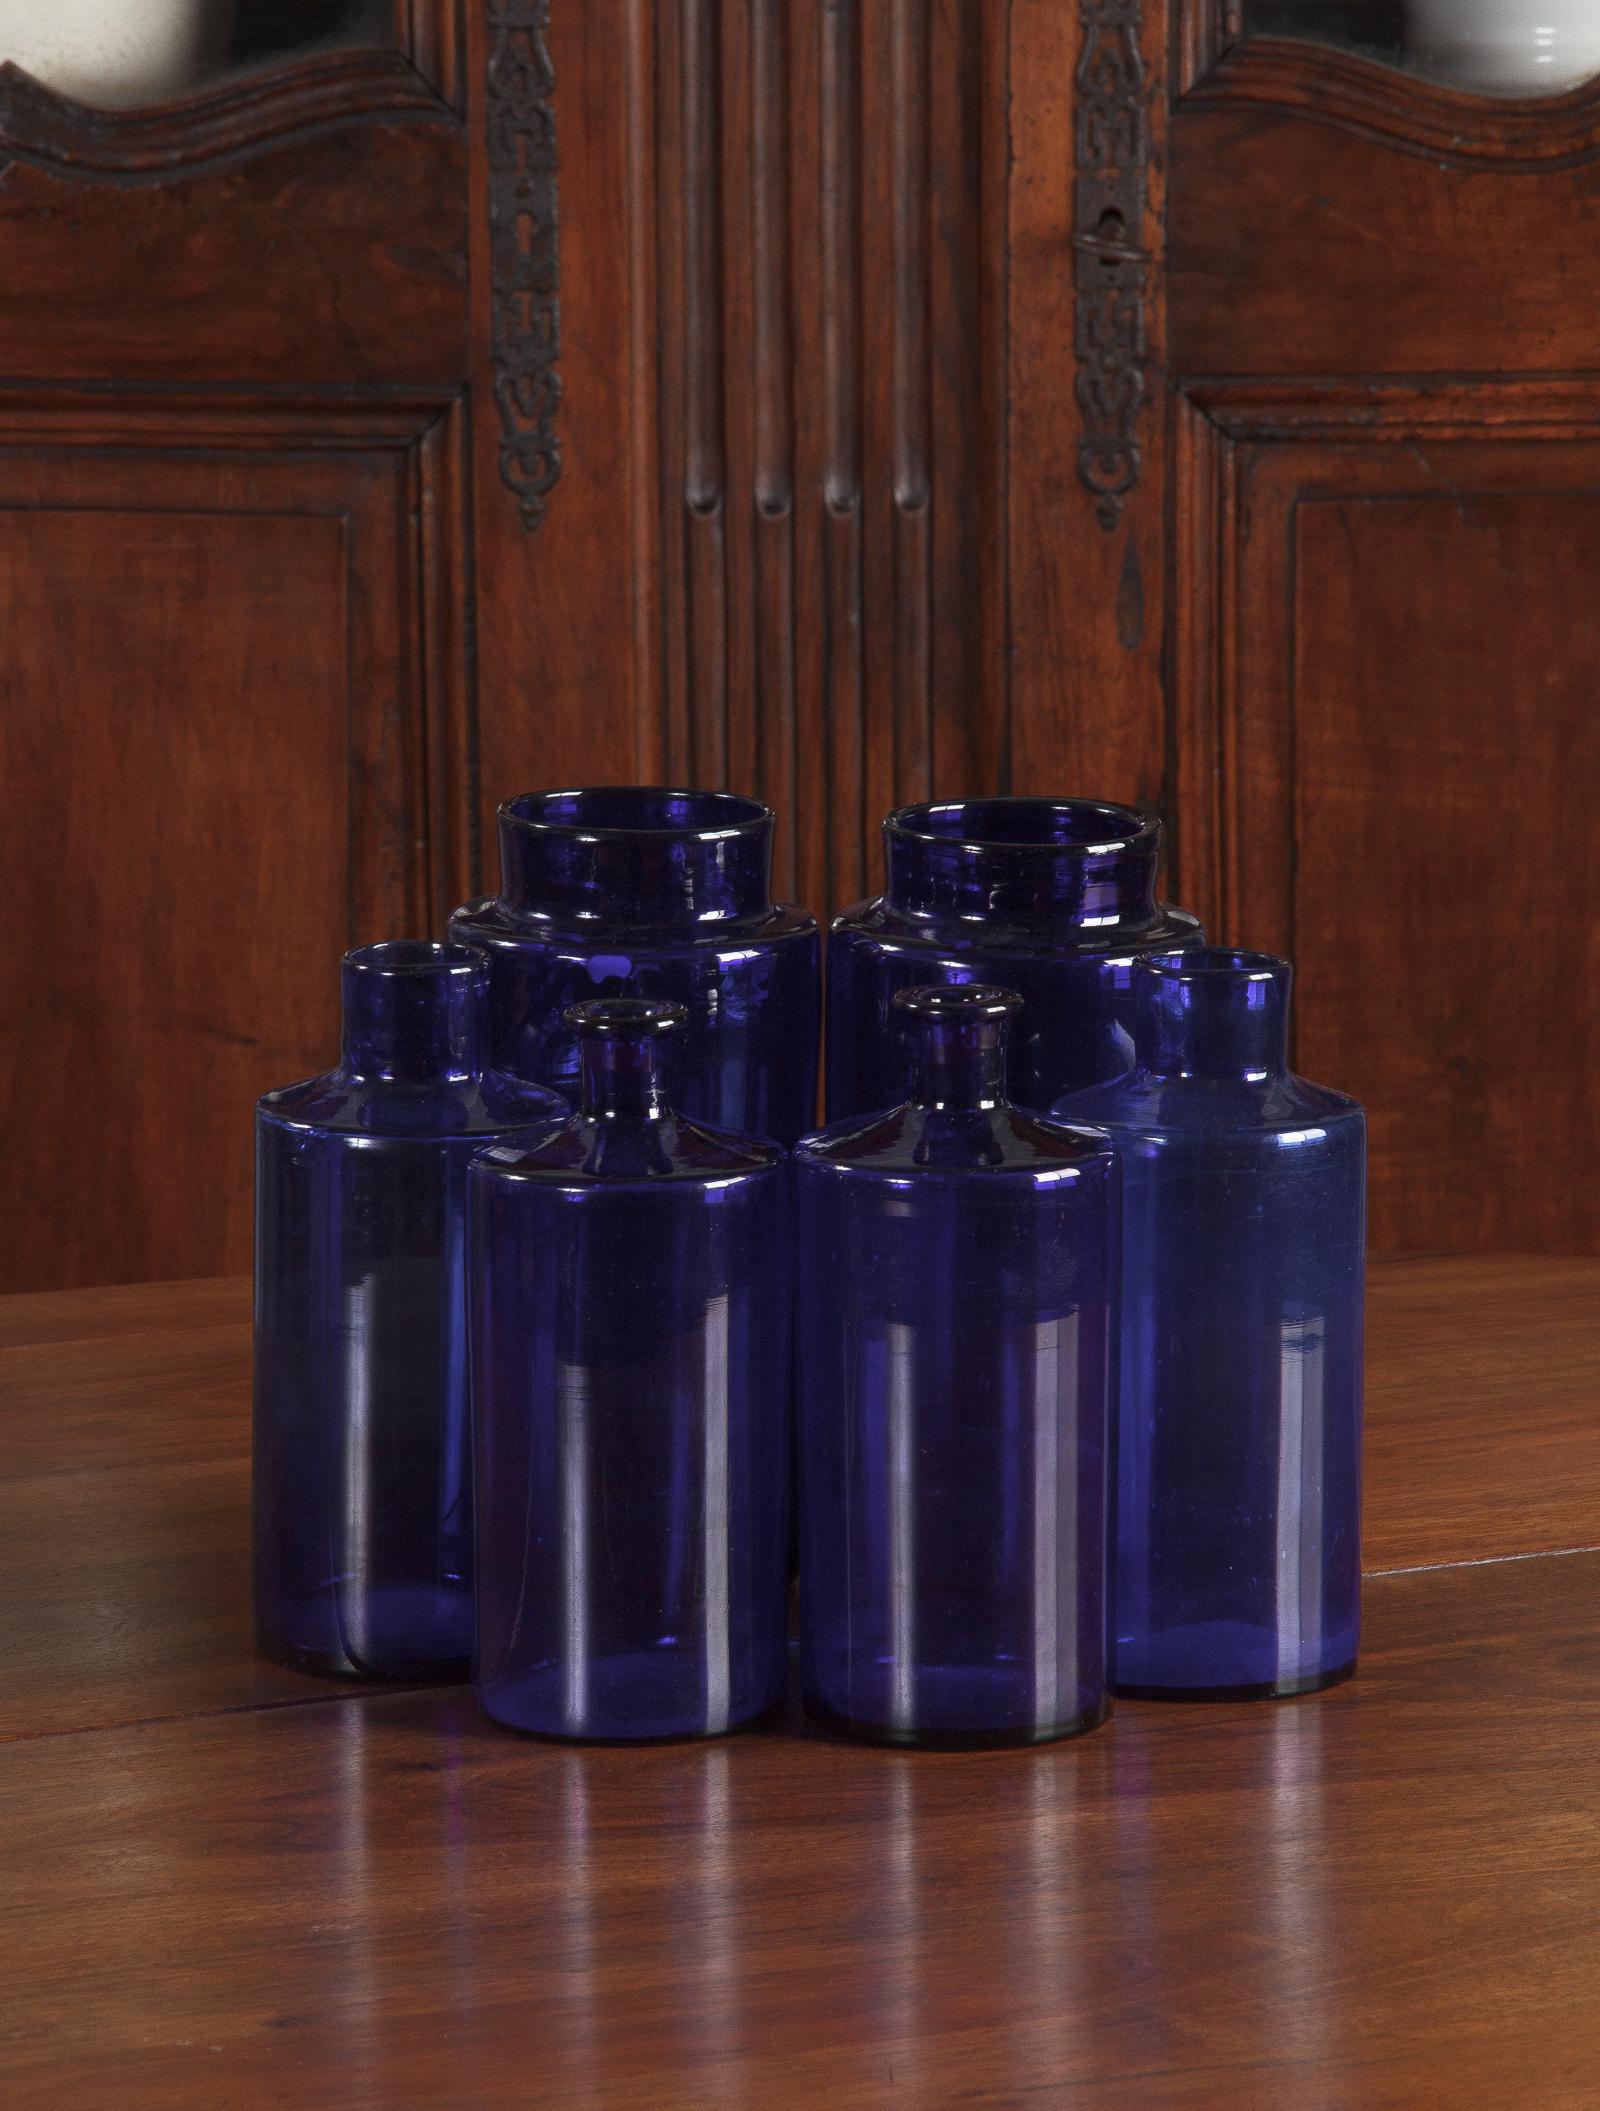 A set of 6 striking French hand blown cobalt blue glass pharmacy bottles, circa 1930s. Bottles have straight sides and a slight slope up to the necks. The two largest bottles feature a short neck and a wide mouth, they measure 9.5